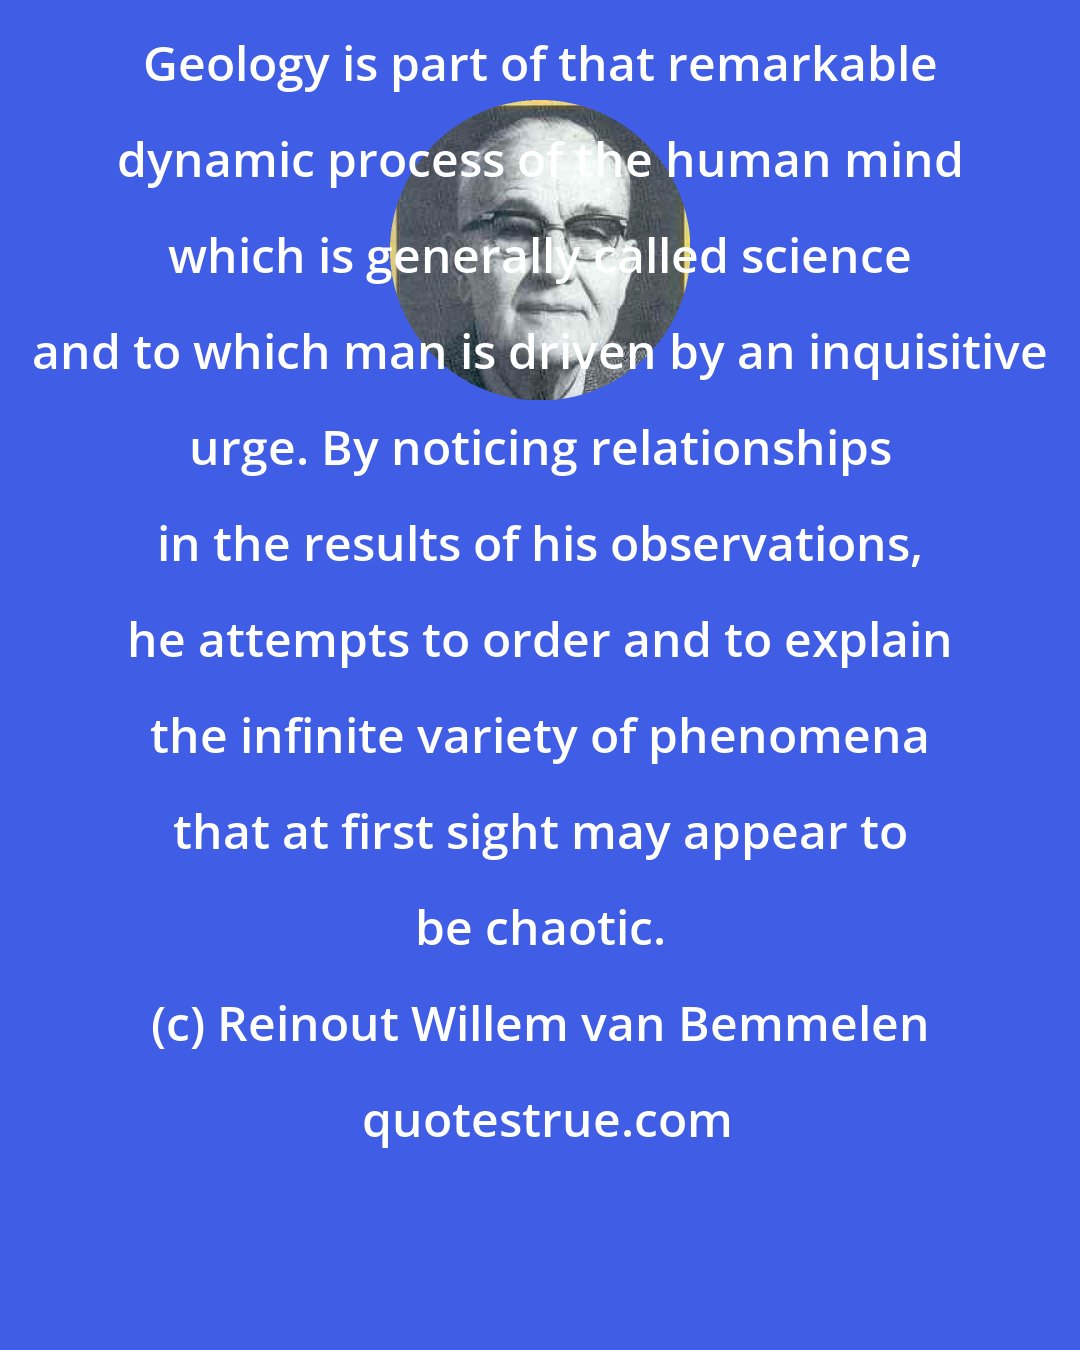 Reinout Willem van Bemmelen: Geology is part of that remarkable dynamic process of the human mind which is generally called science and to which man is driven by an inquisitive urge. By noticing relationships in the results of his observations, he attempts to order and to explain the infinite variety of phenomena that at first sight may appear to be chaotic.